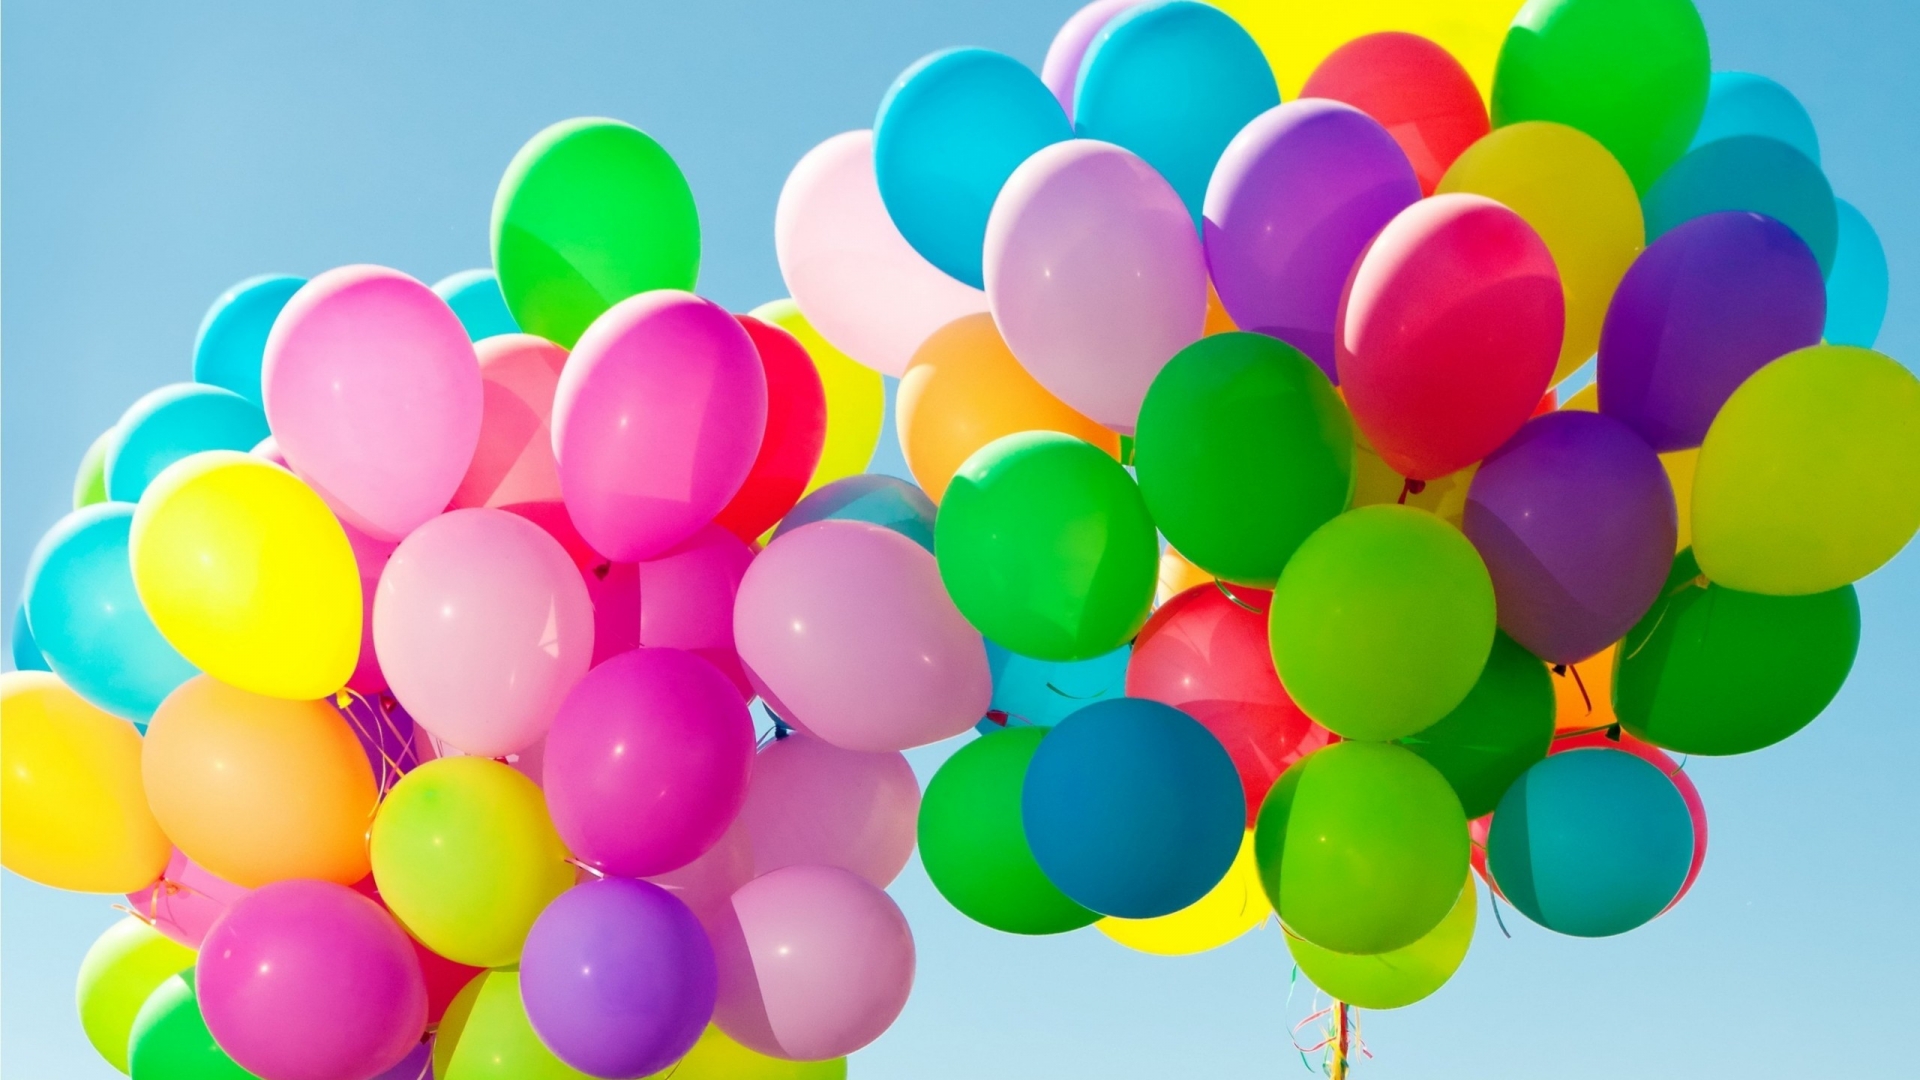 Colorful Balloons in the Sky for 1920 x 1080 HDTV 1080p resolution